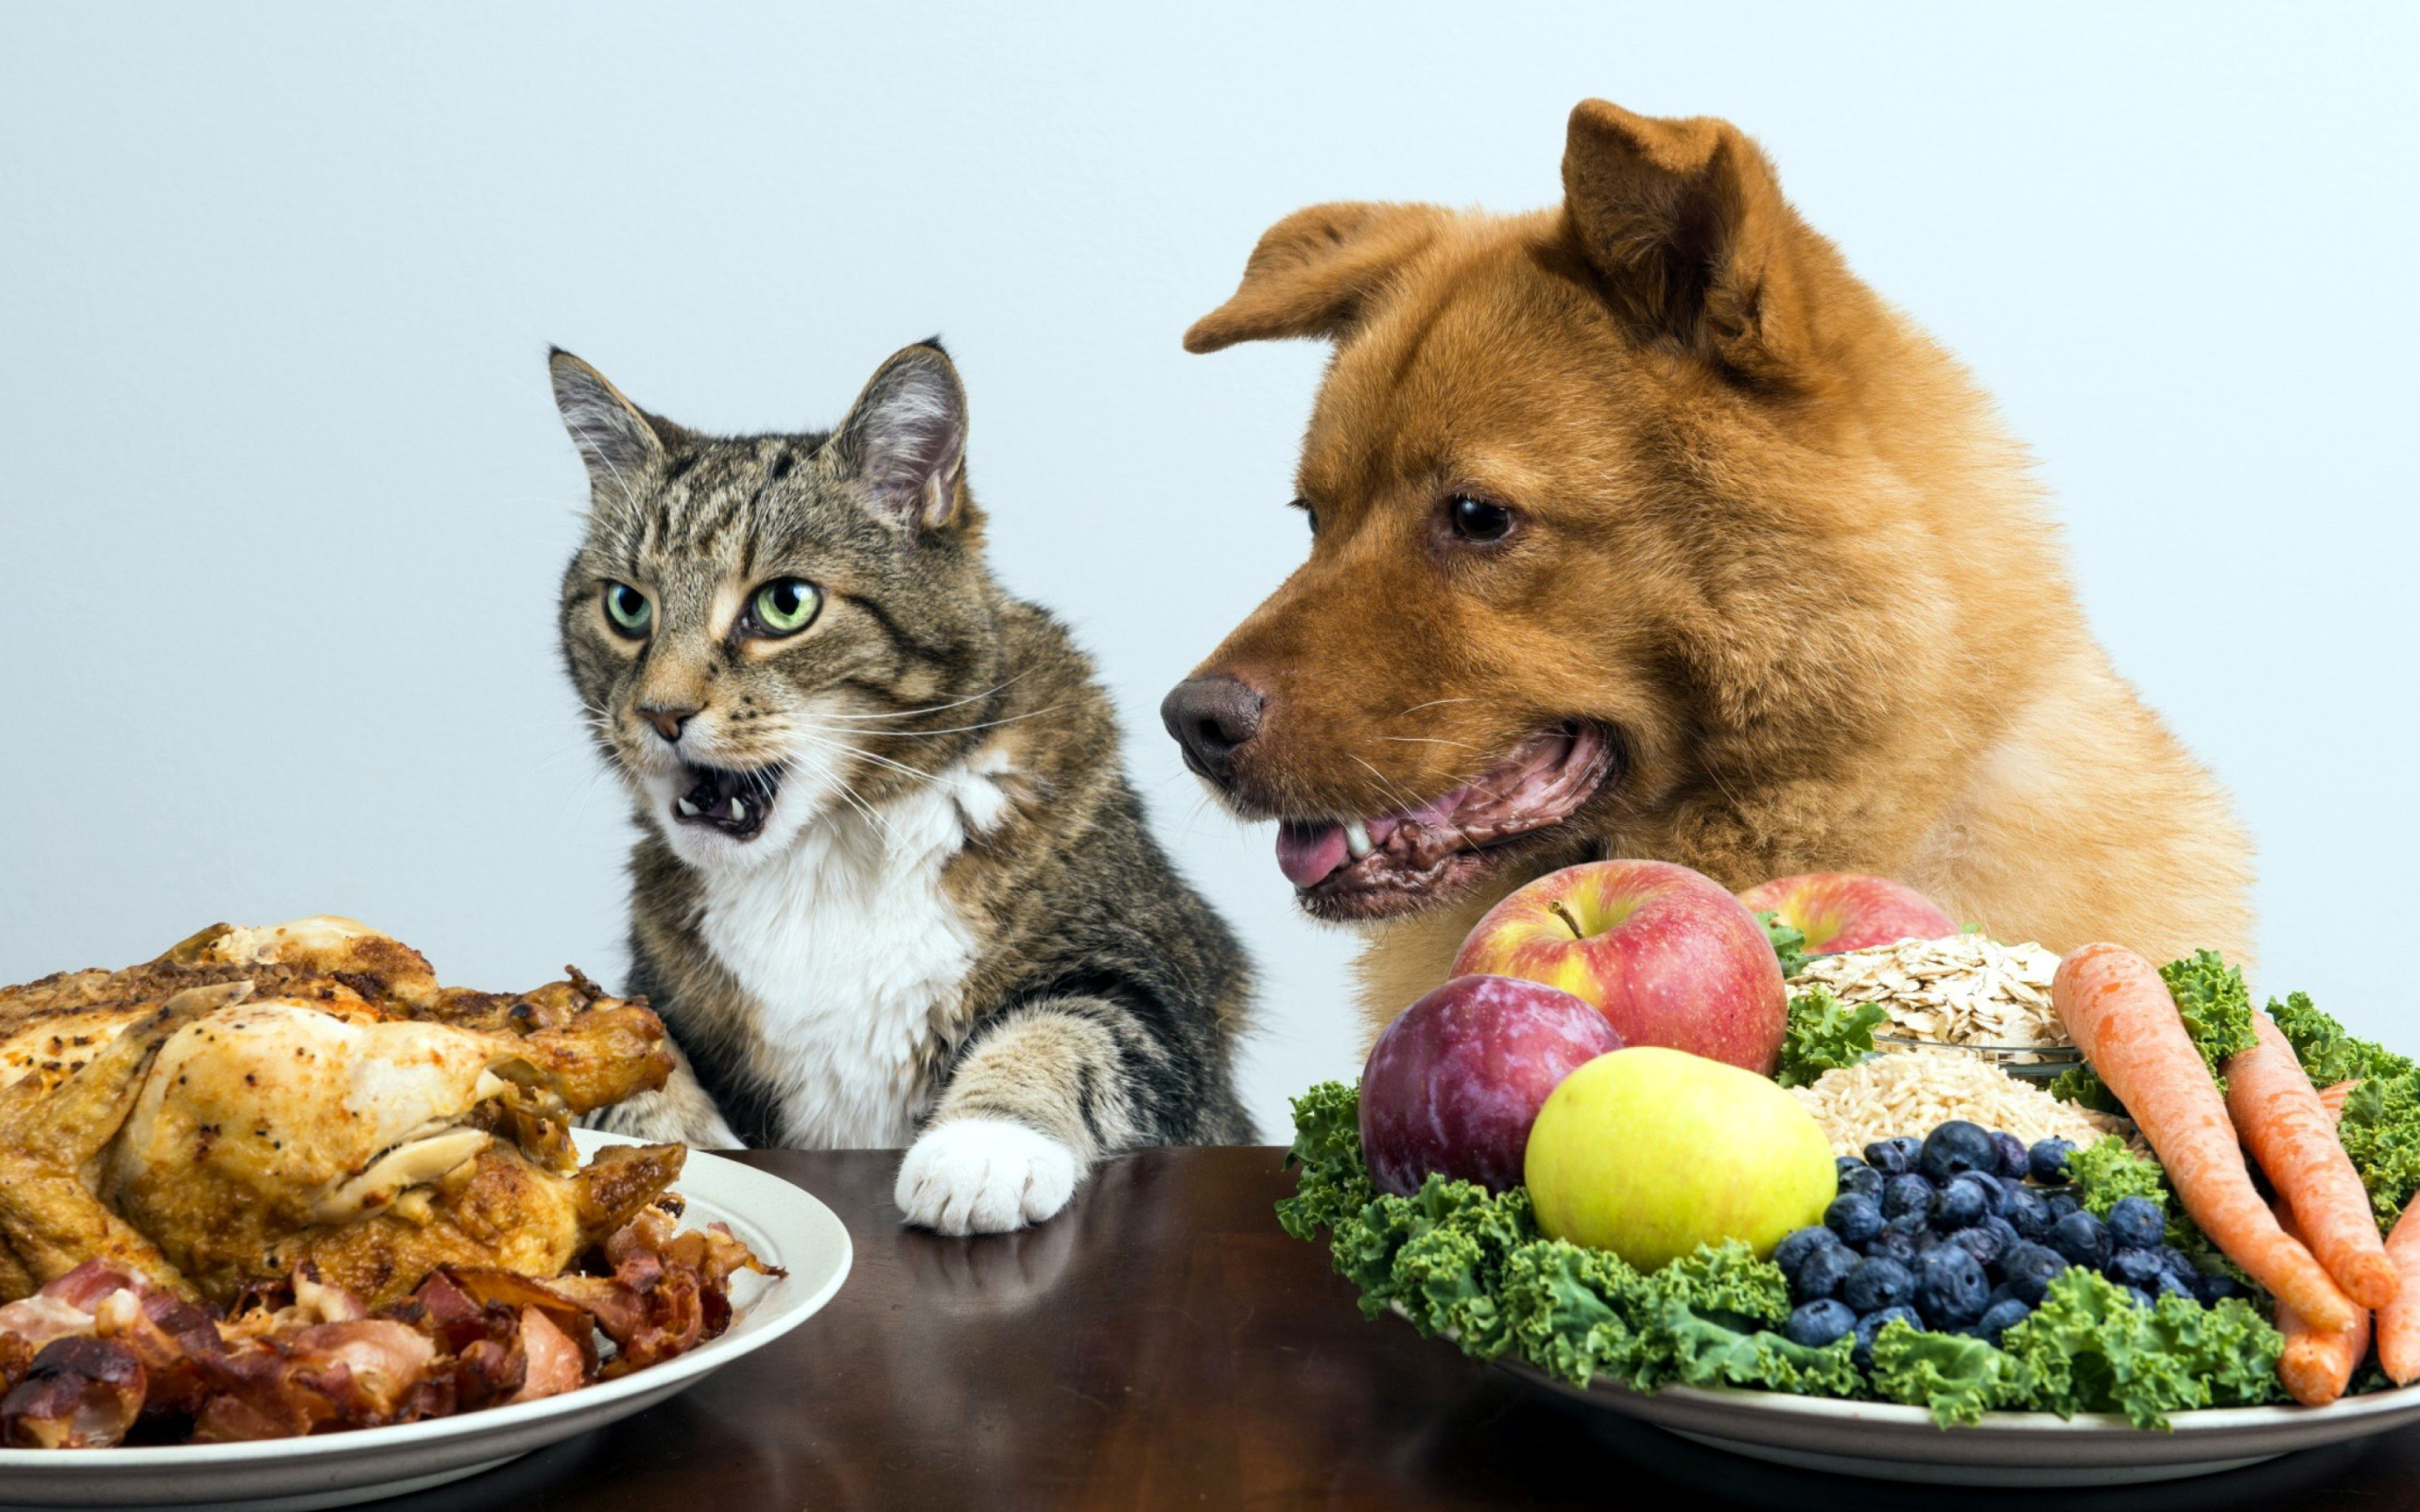 Dog and Cat Dinner wallpaper 2560x1600